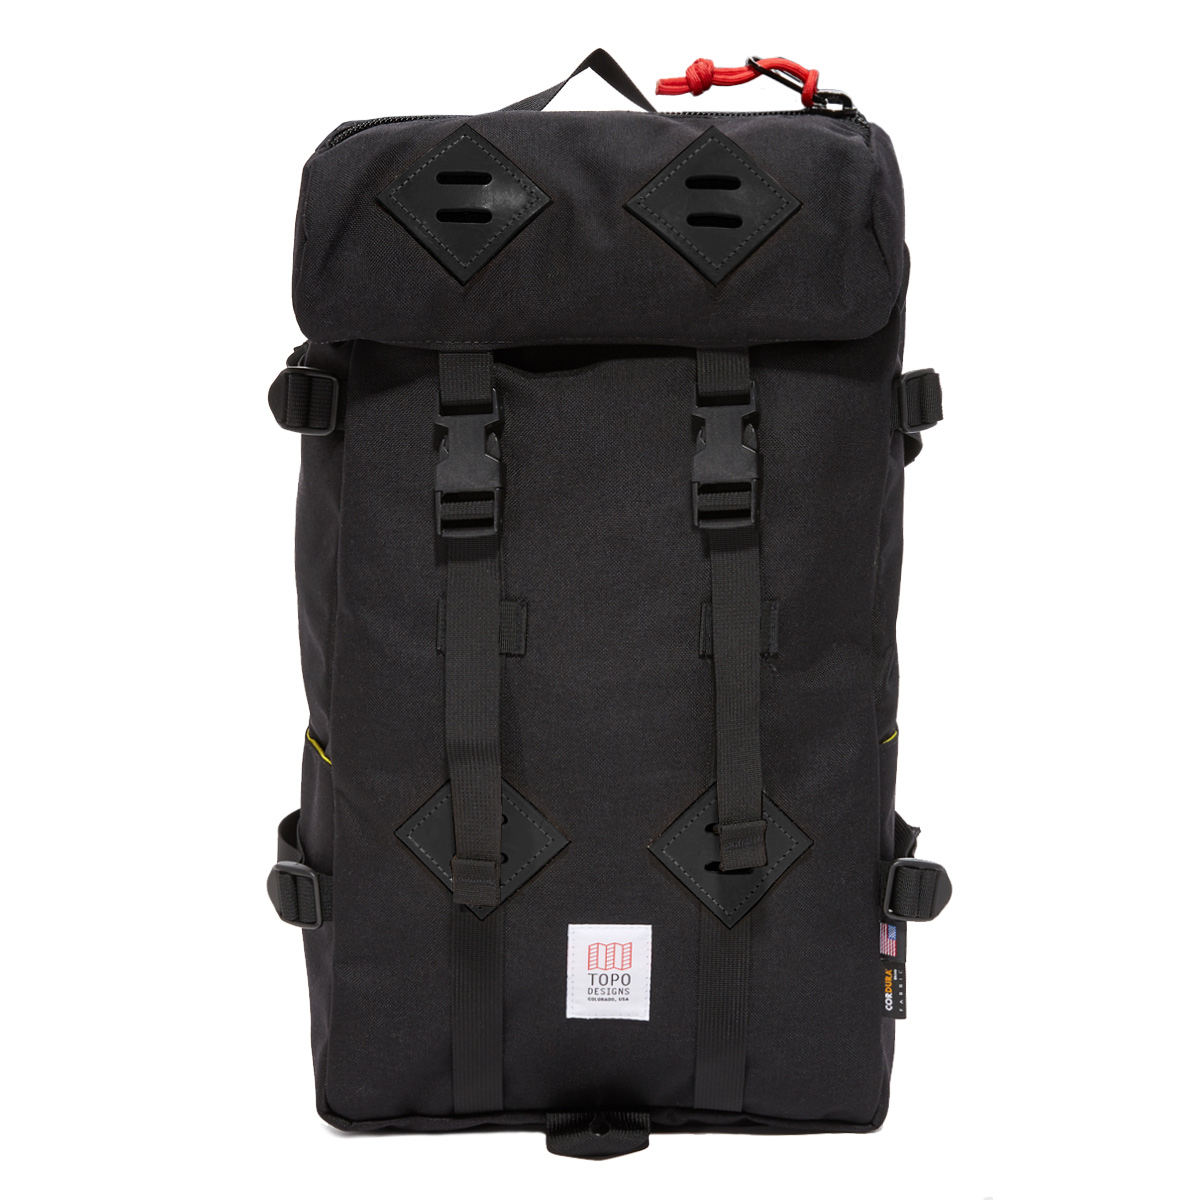 Topo Designs Klettersack, classic backpack from Topo Designs